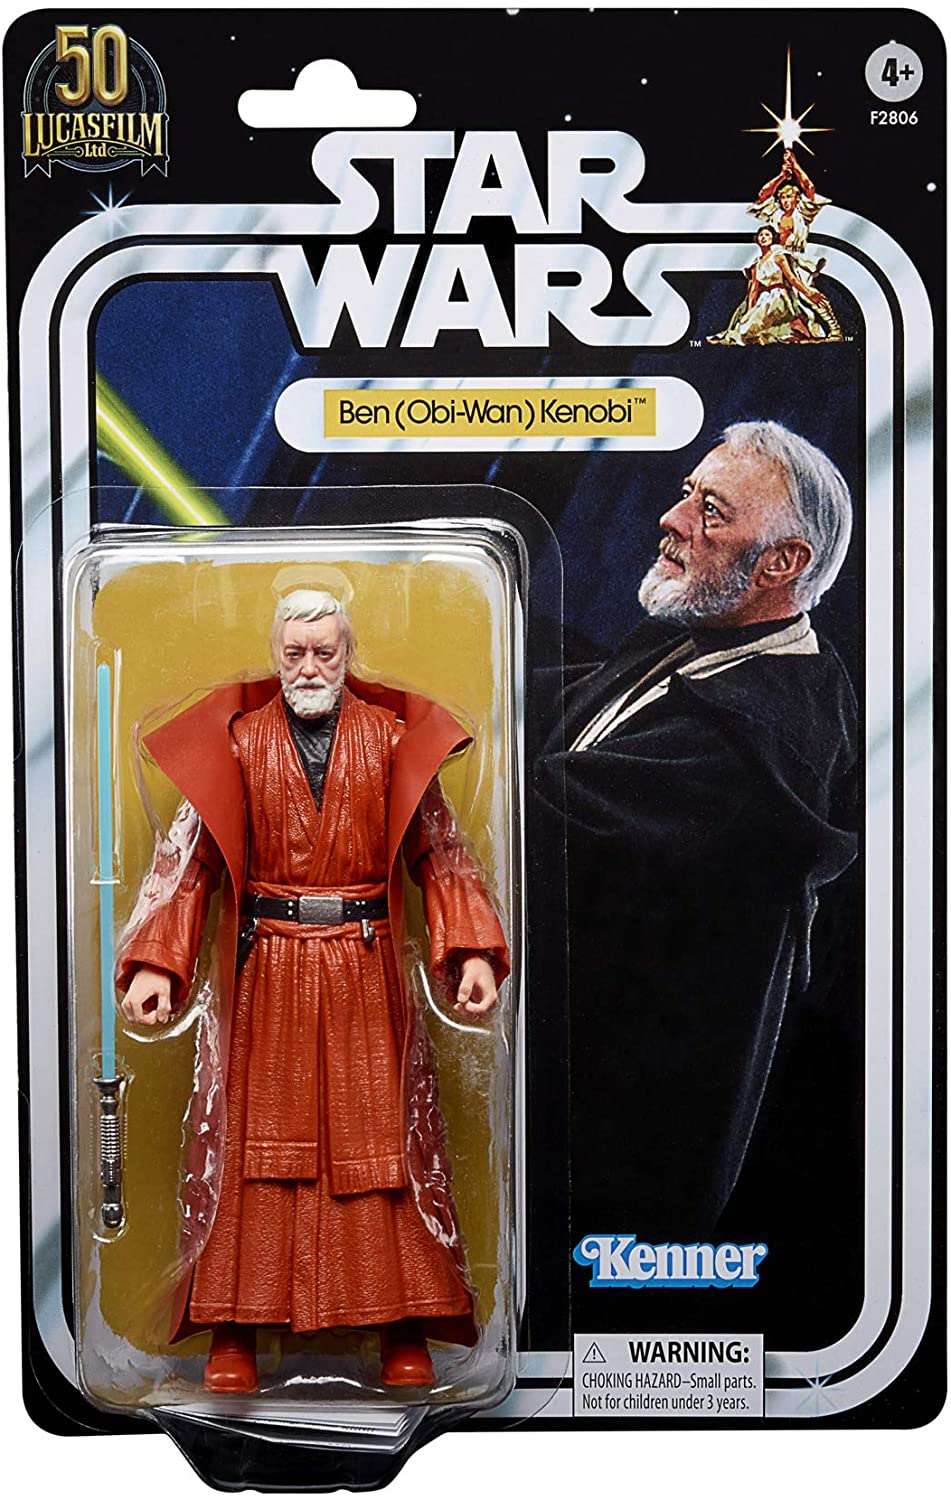 Star Wars The Black Series Ben (OBI-Wan) Kenobi 6-Inch-Scale Lucasfilm 50th Anniversary Original Trilogy Collectible Action Figure carded